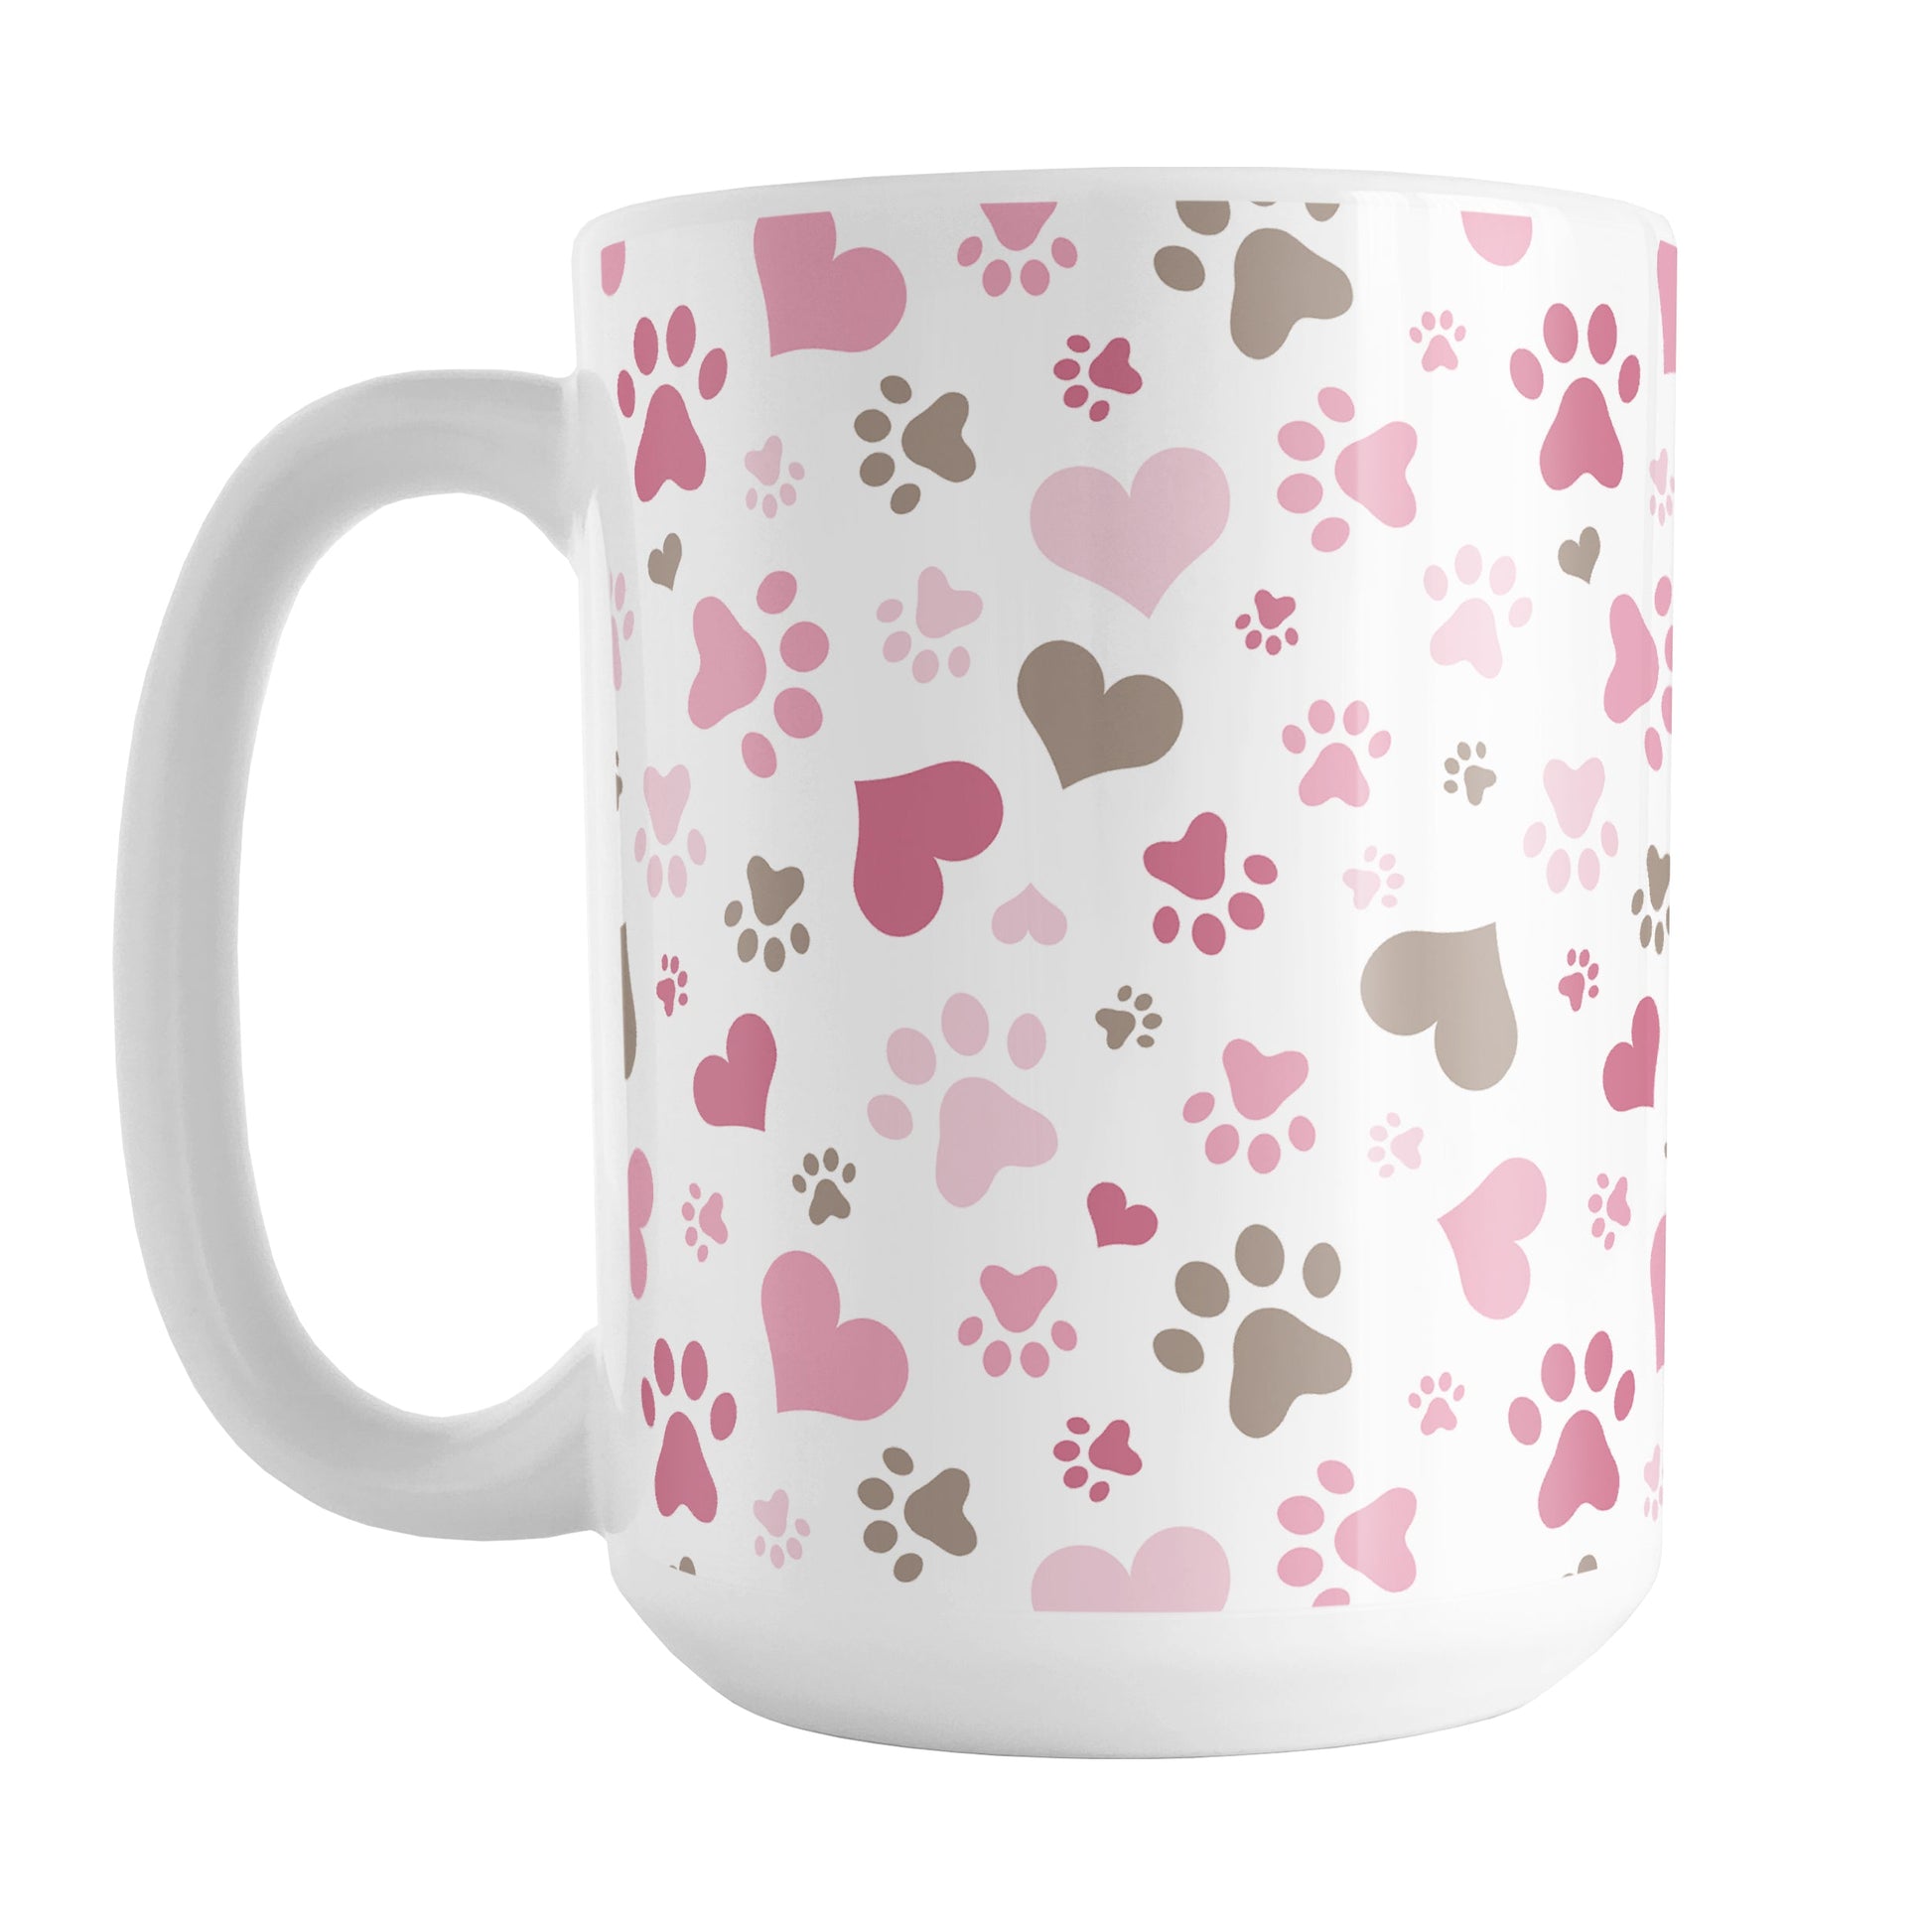 Pink Hearts and Paw Prints Mug (15oz) at Amy's Coffee Mugs. A ceramic coffee mug designed with a pattern of hearts and paw prints in brown and different shades of pink that wraps around the mug to the handle. This mug is perfect for people love dogs and cute paw print designs.